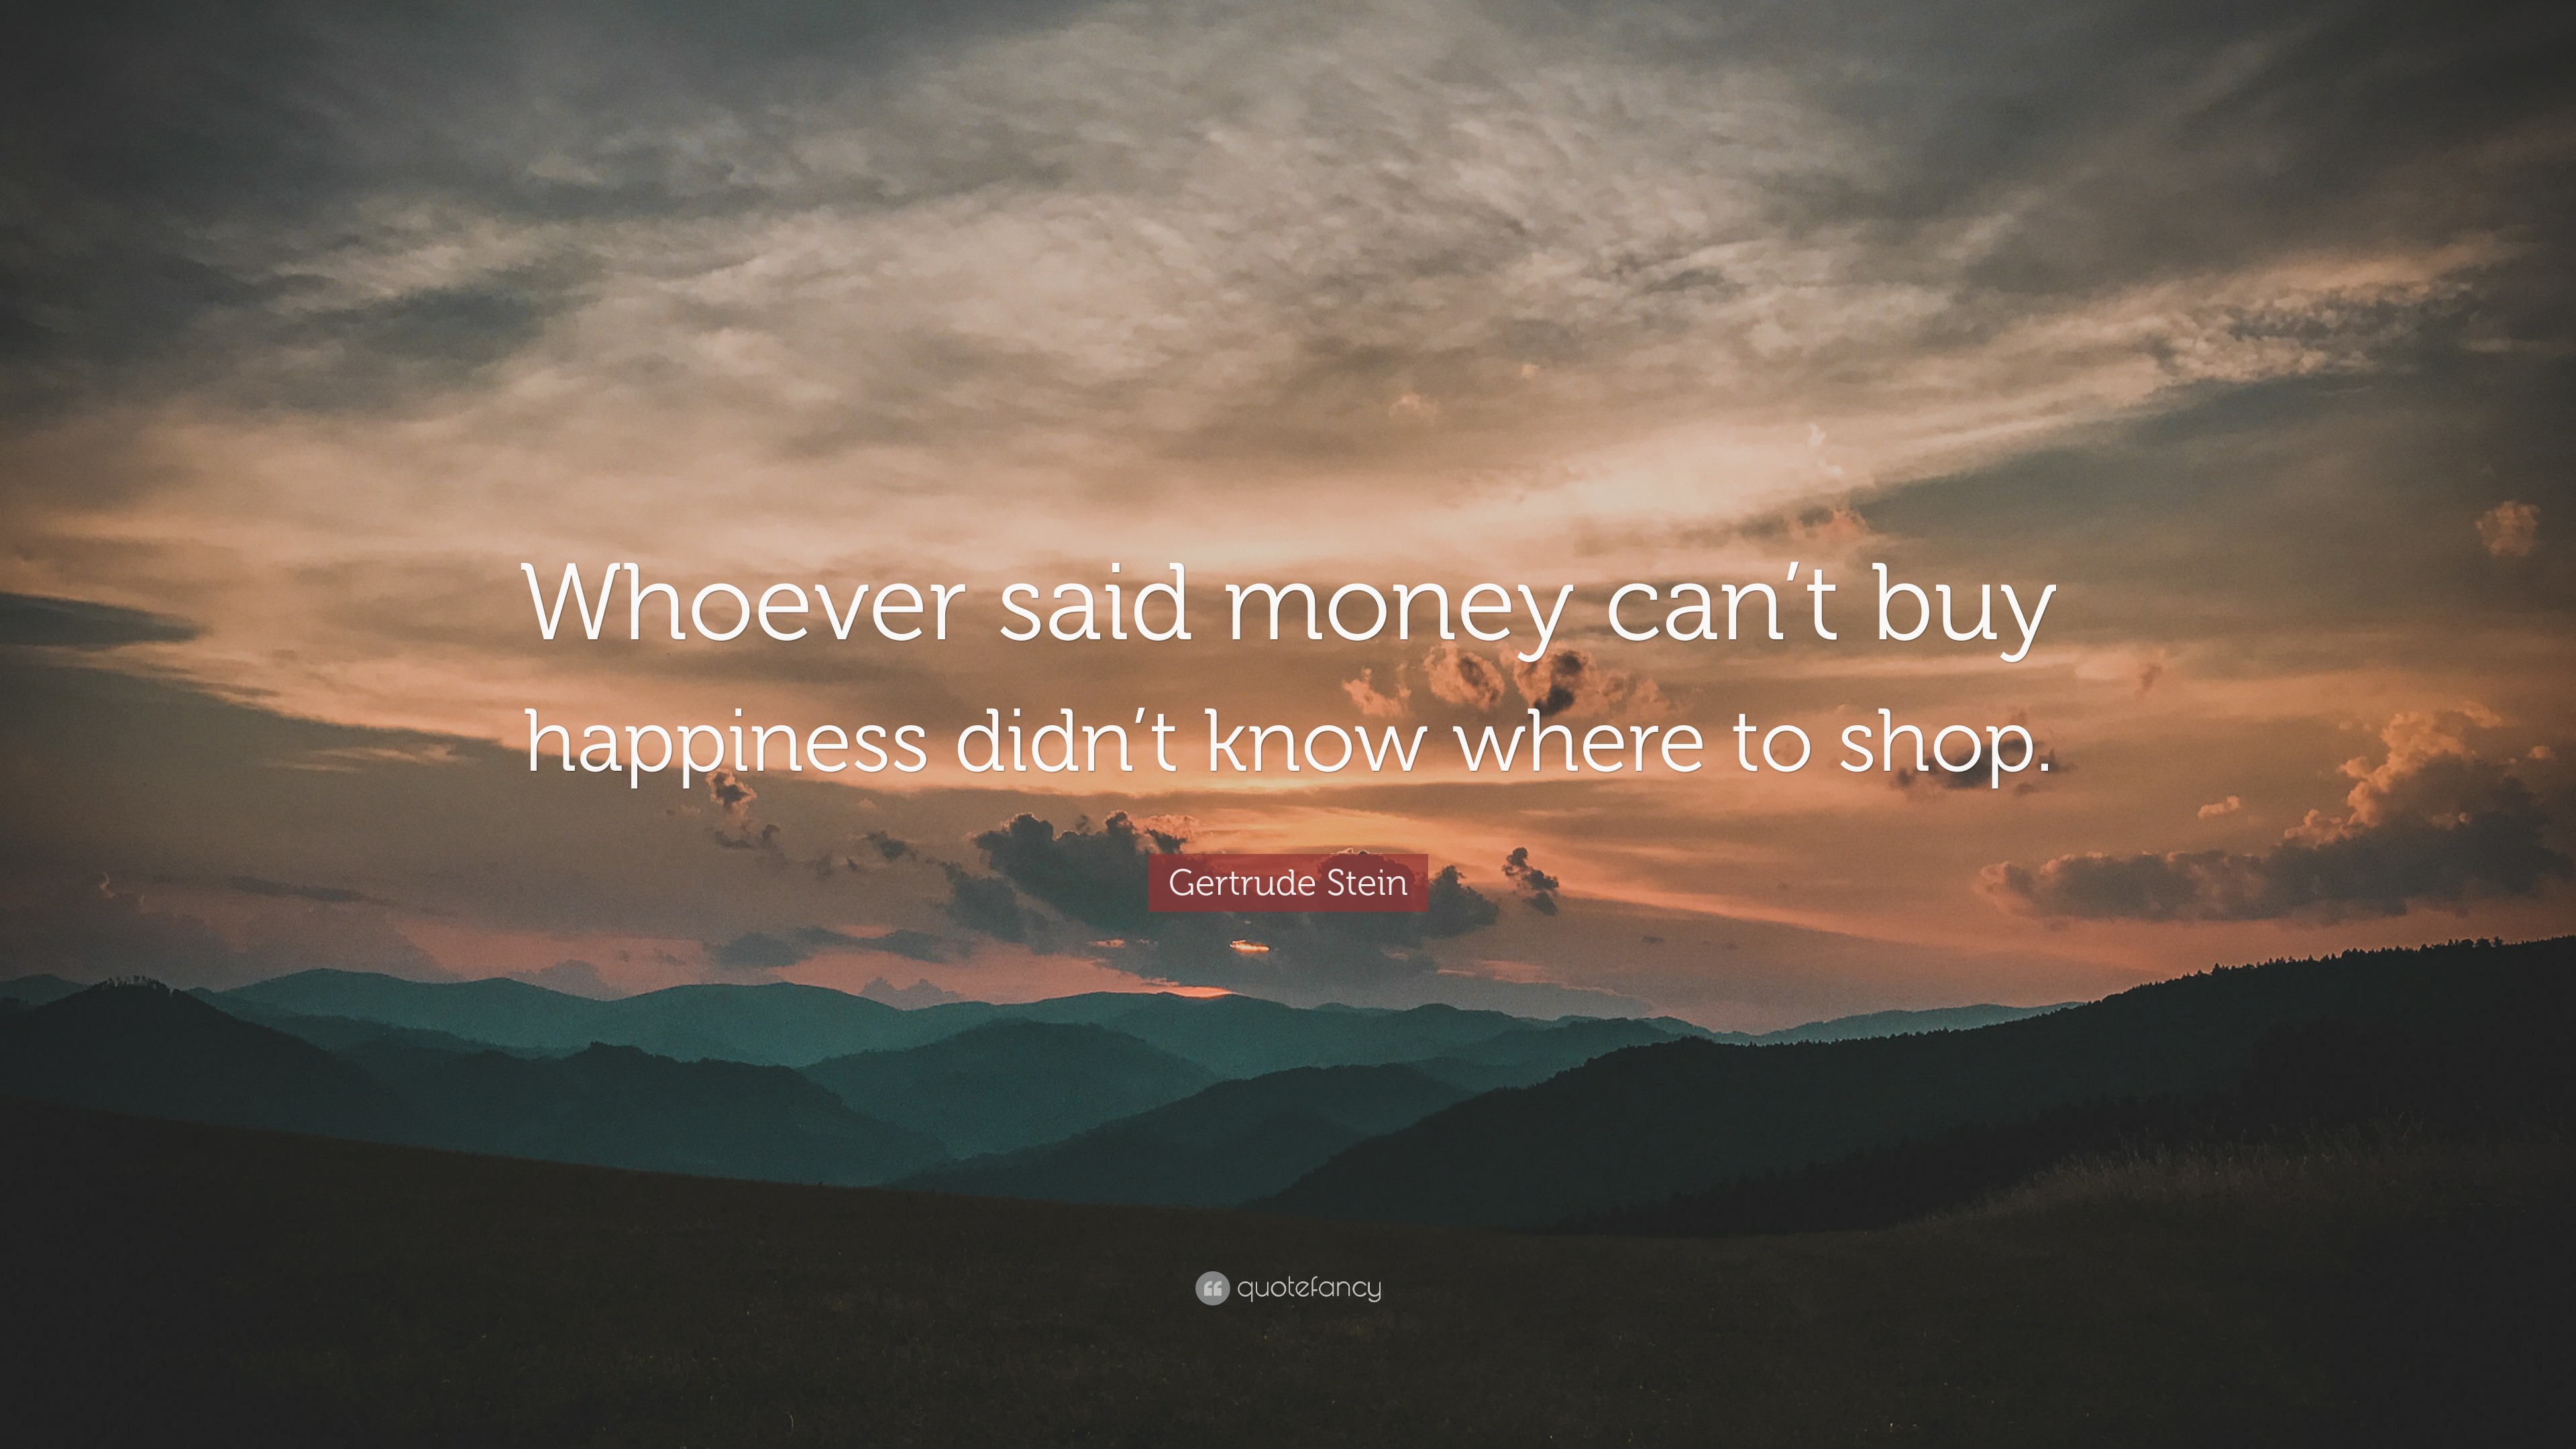 Gertrude Stein Quote: “Whoever said money can't buy happiness didn